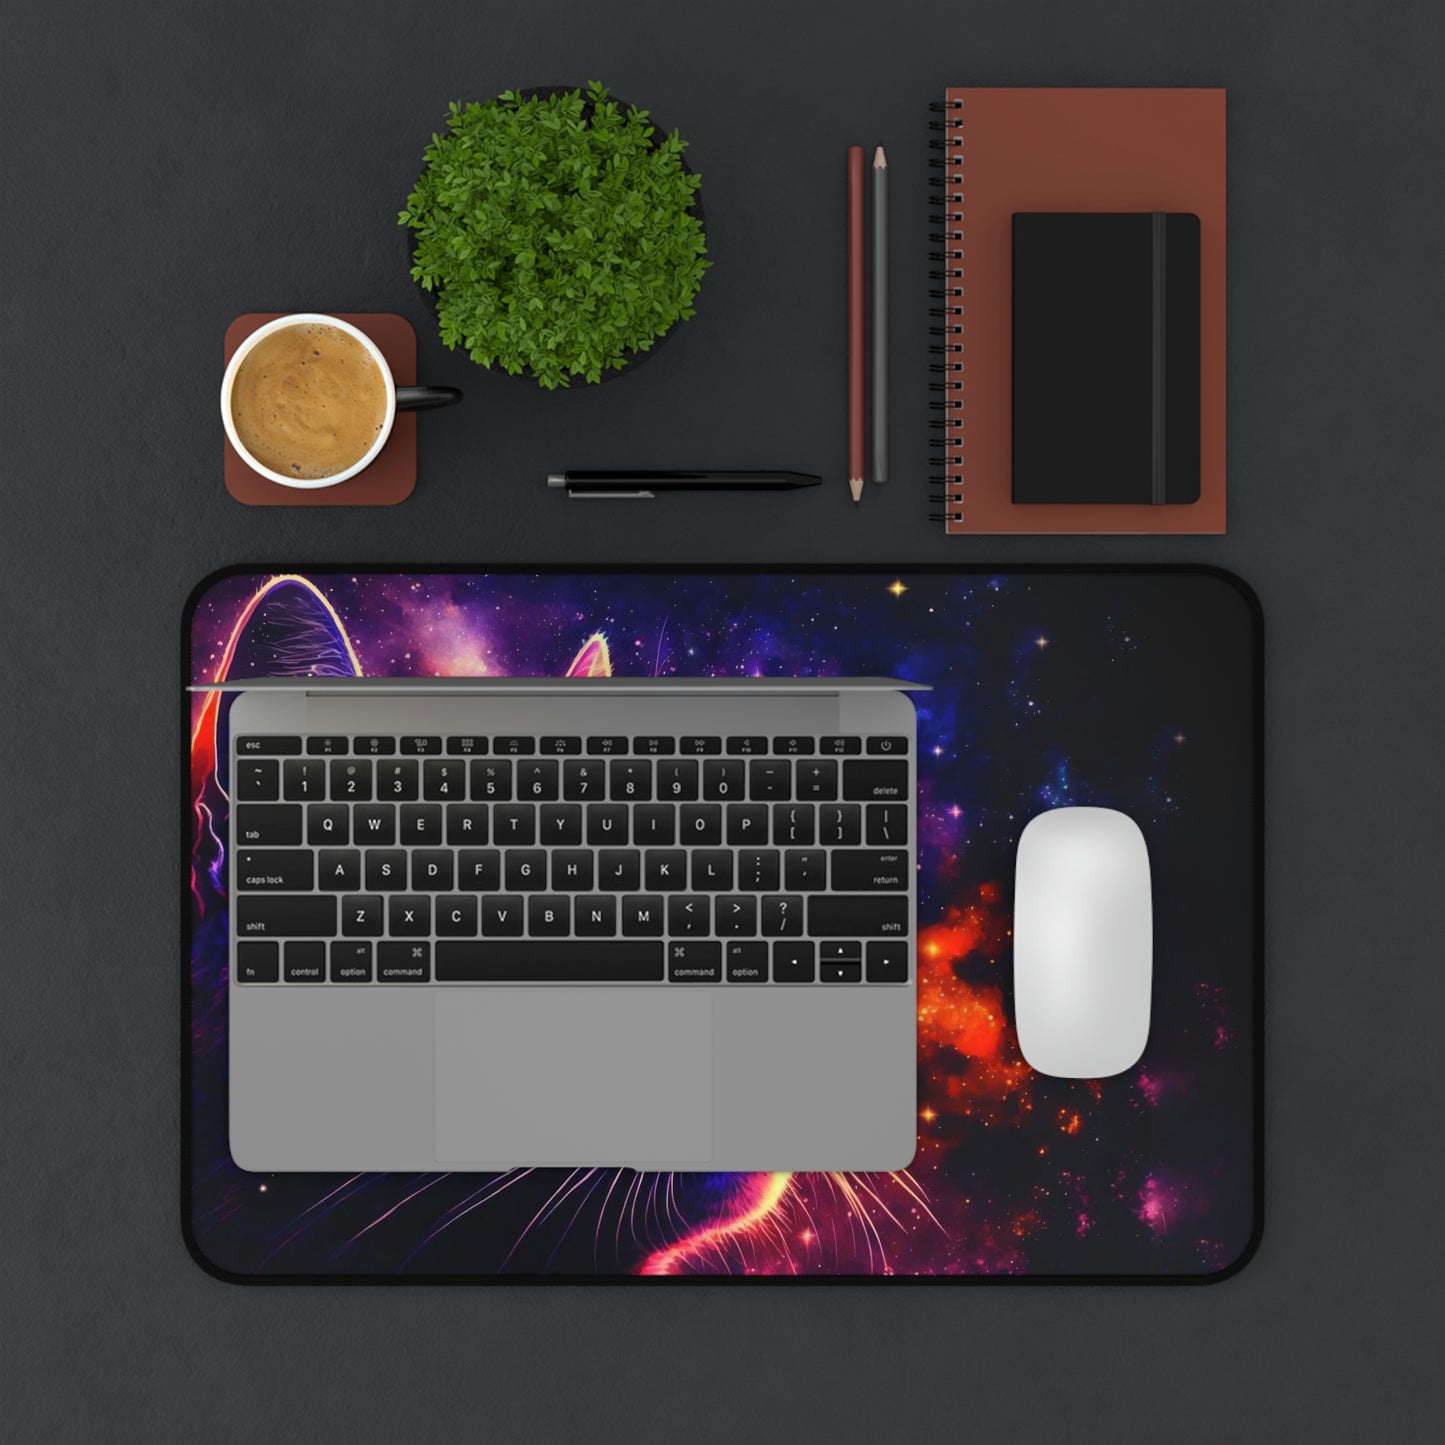 Colorful Cat Gaming Mouse Pad